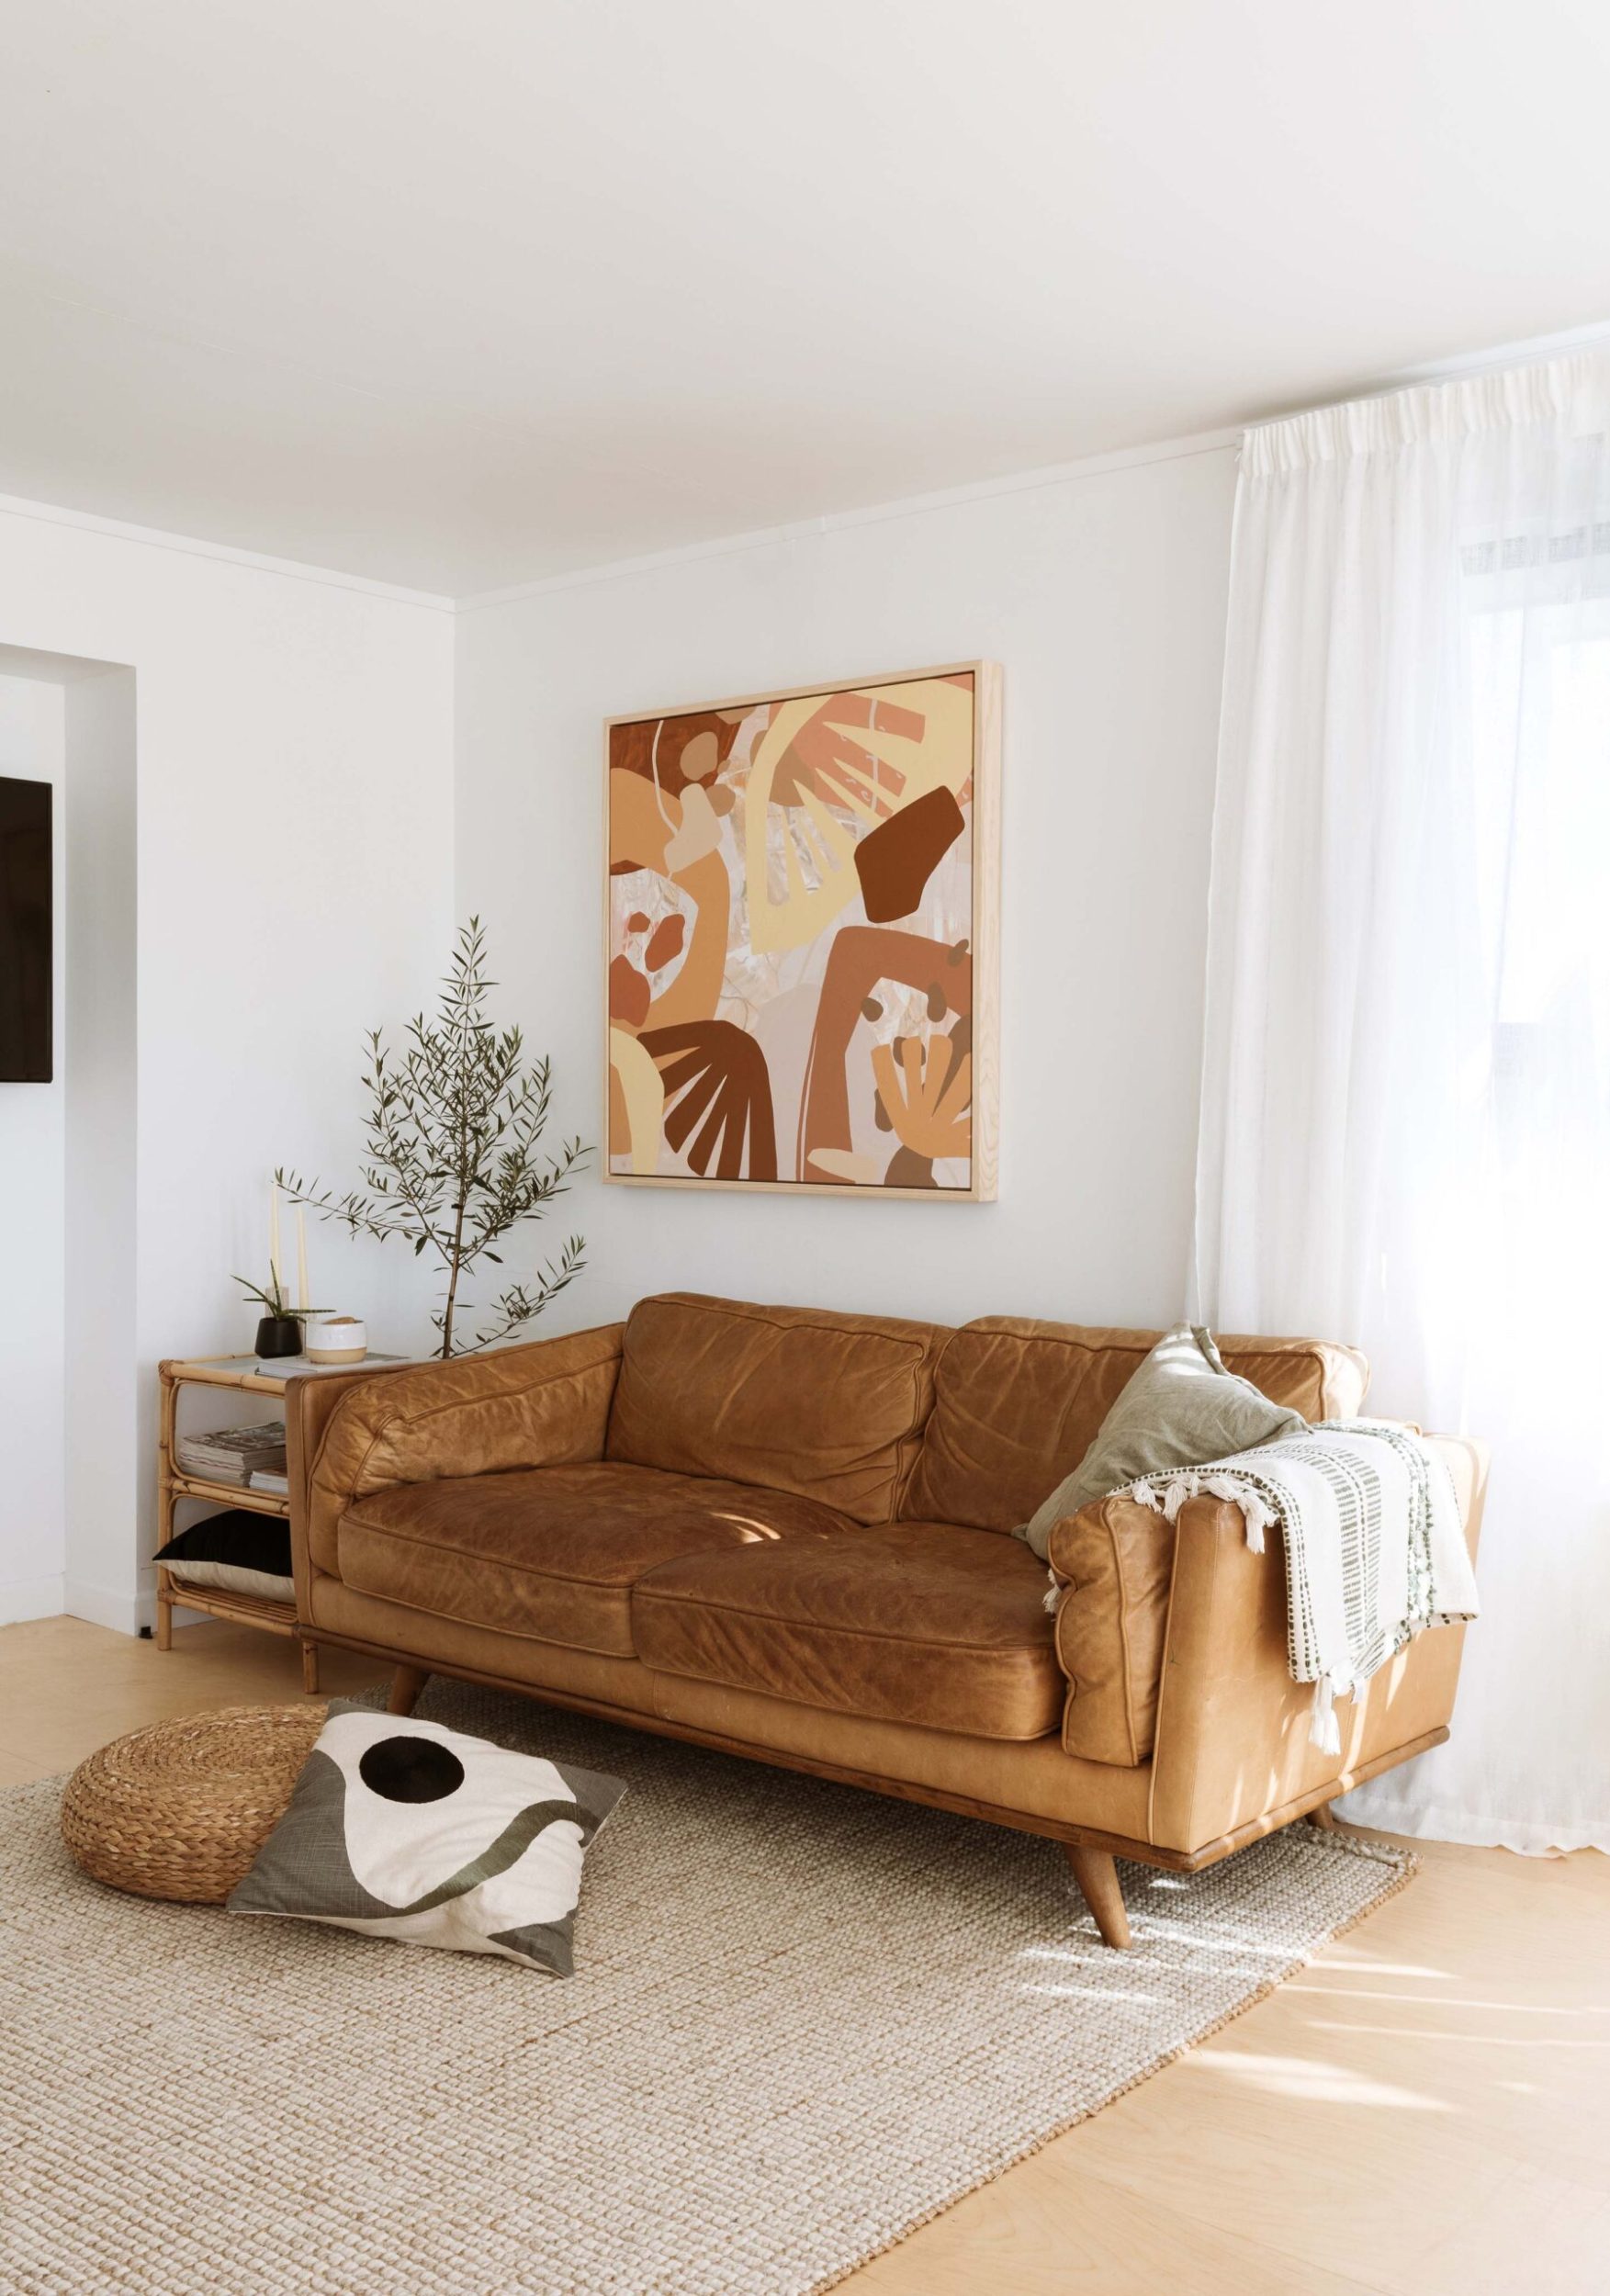 Living room with a large tan leather couch, a large piece of art above, and ply flooring with a natural rug